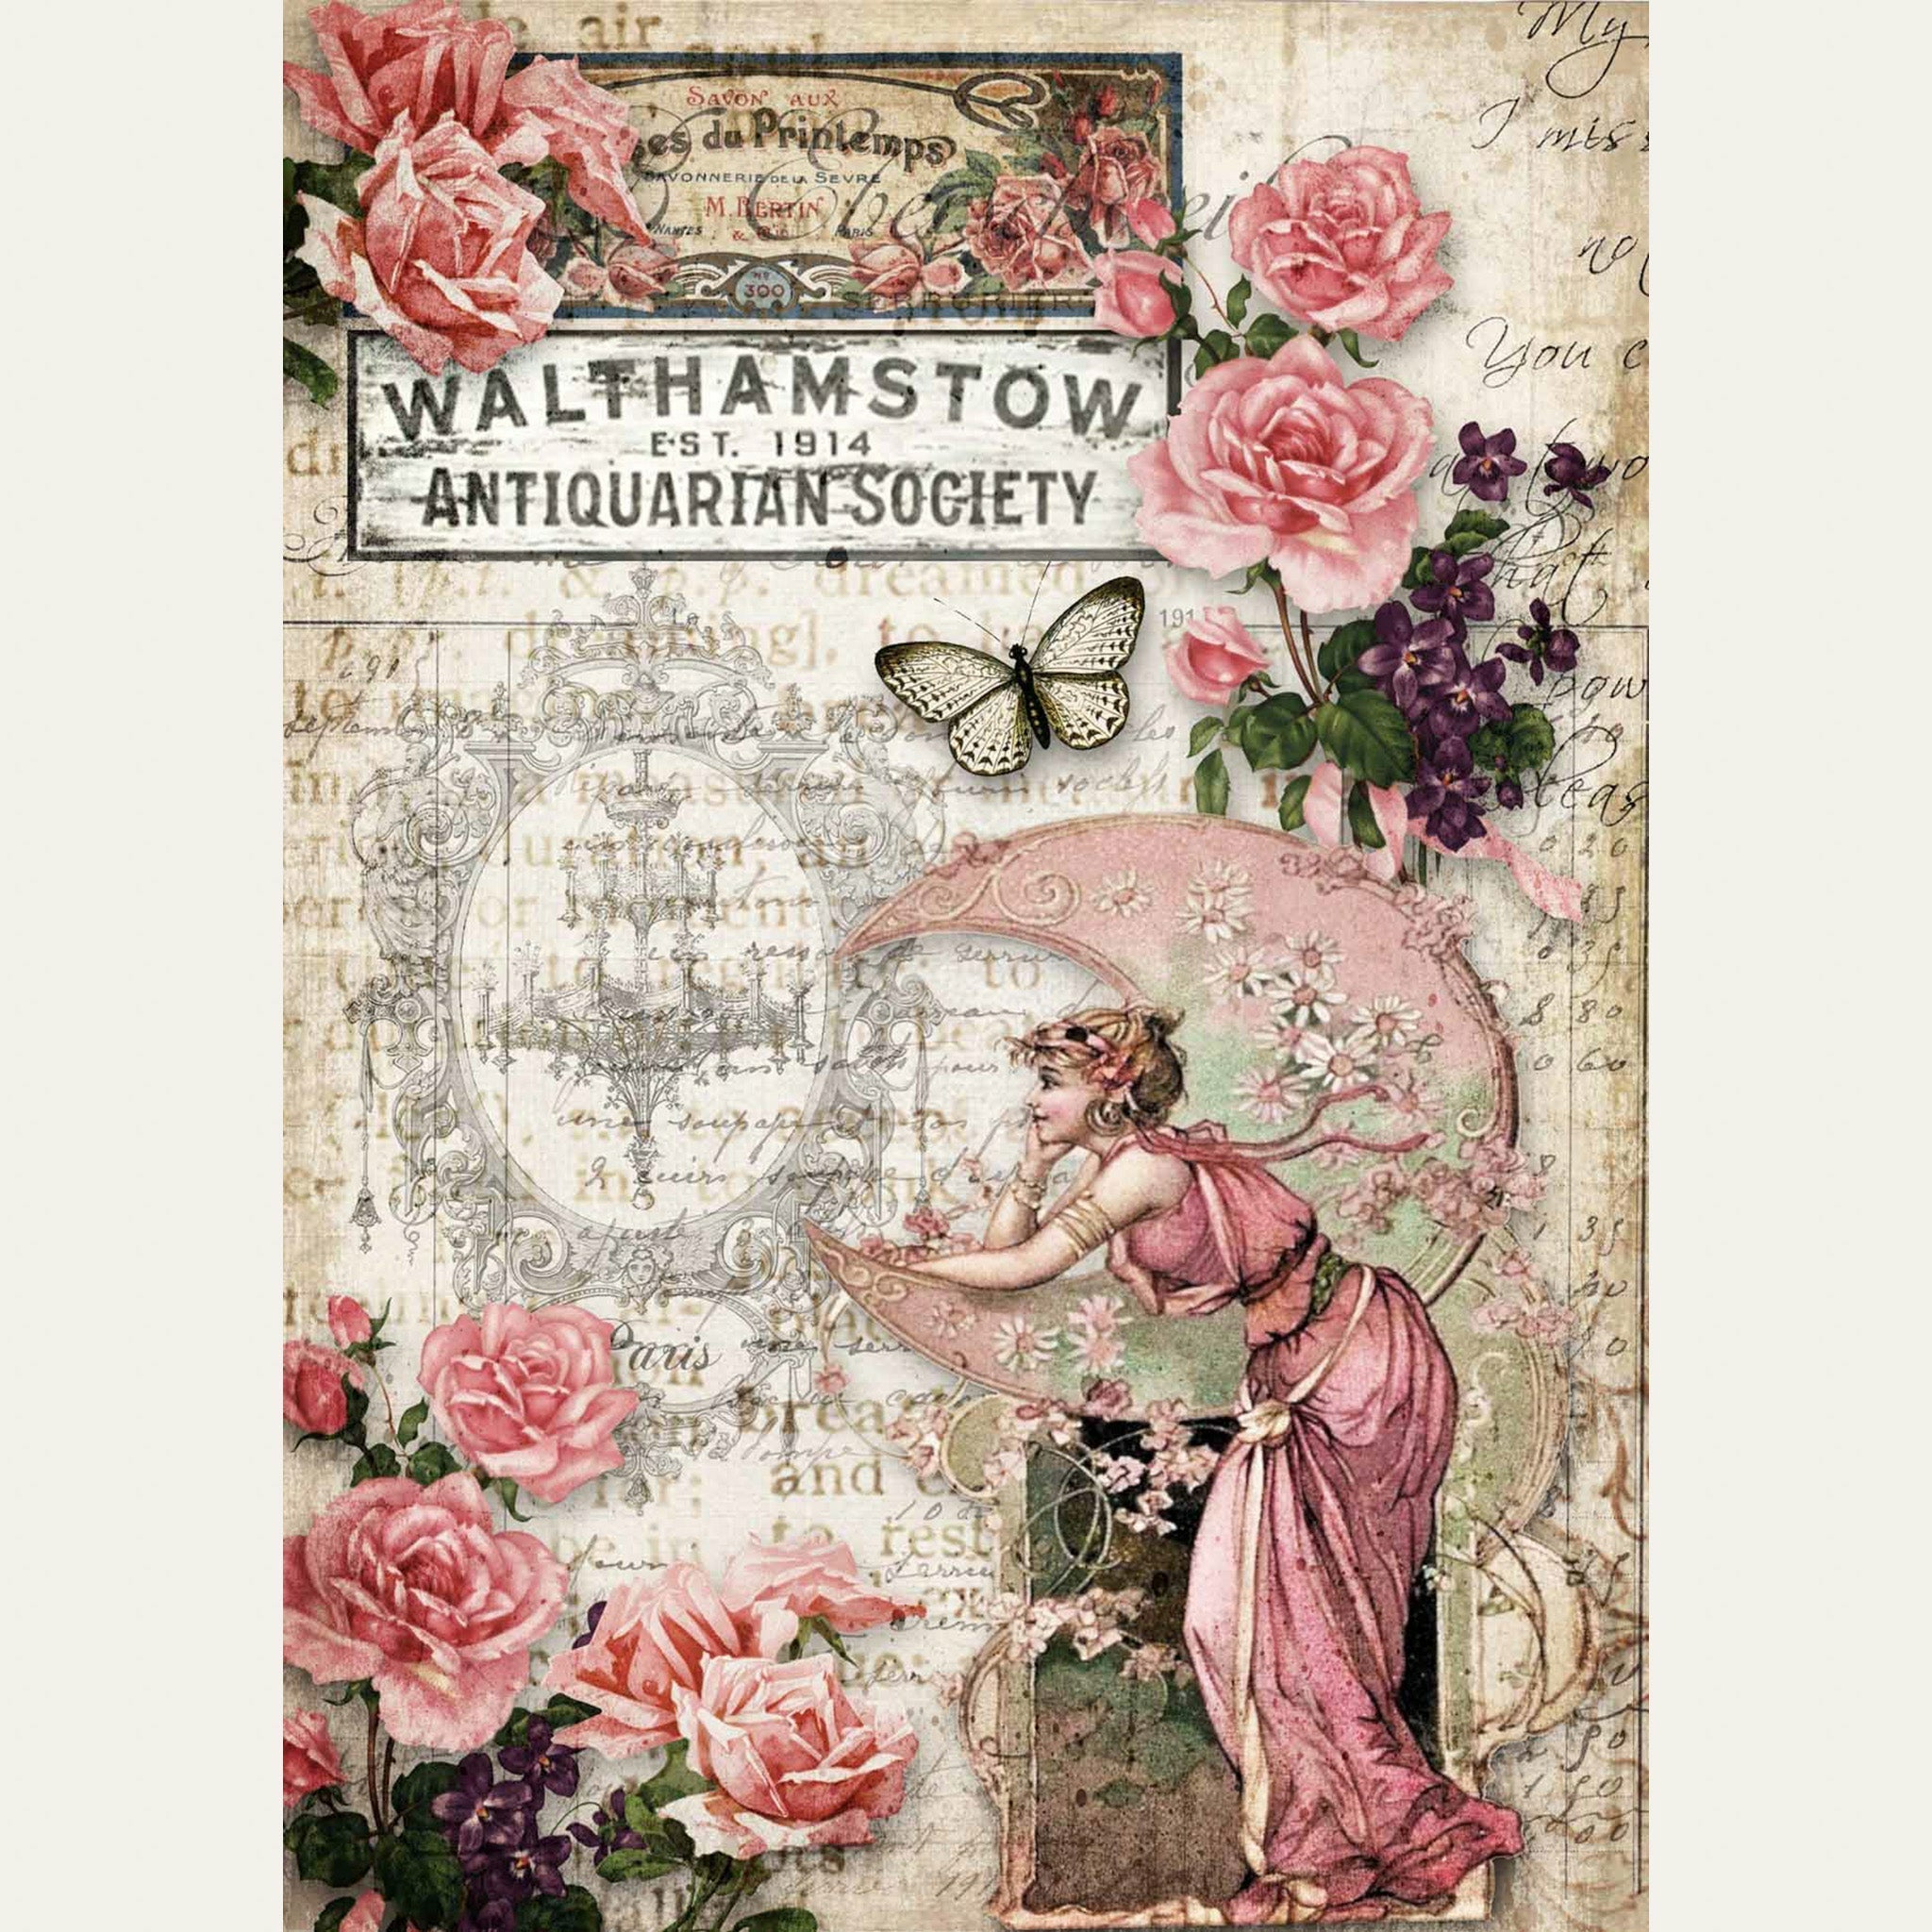 A1 rice paper design that features vintage parchment with writing, large pink roses, a butterfly, vintage signs, and a woman in a pink dress resting on a pale pink crescent moon. White borders on the sides.